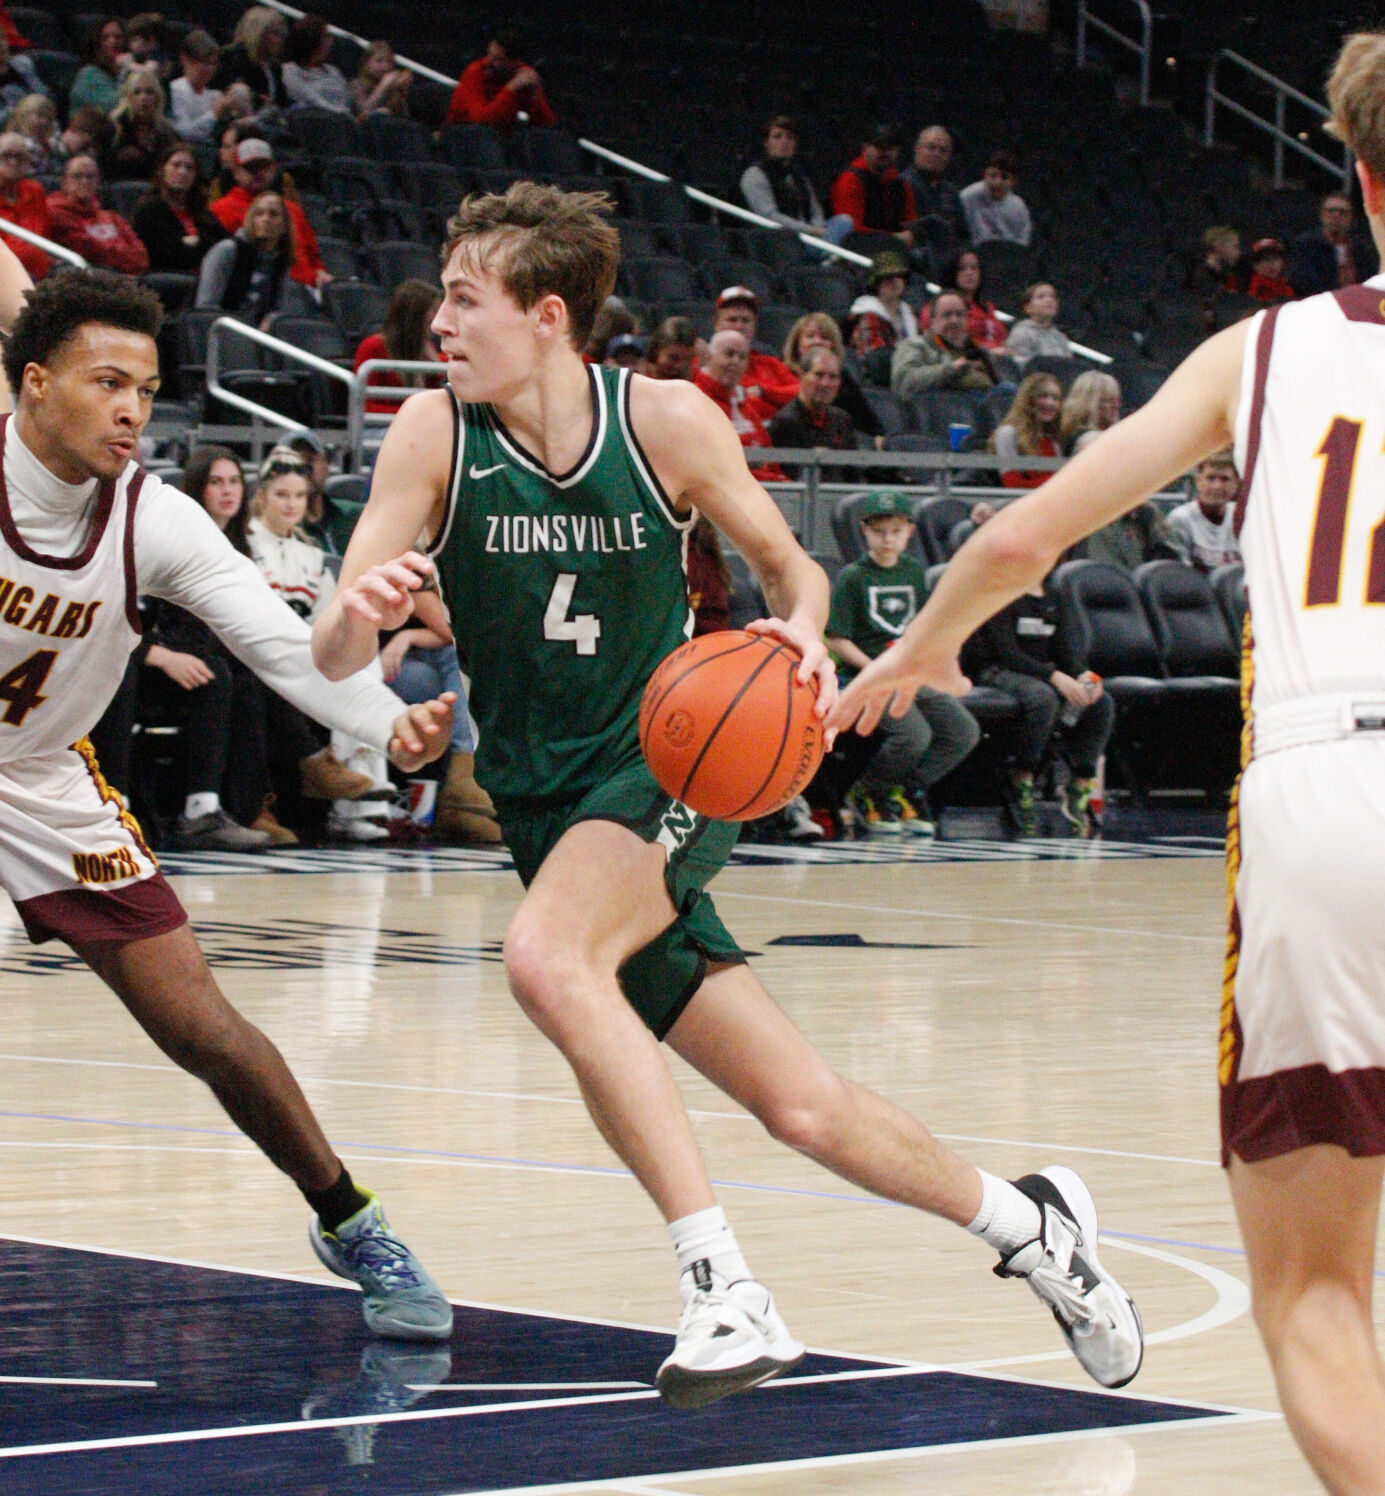 Zionsville Boys Basketball: New Players, Daily Improvement and High Expectations